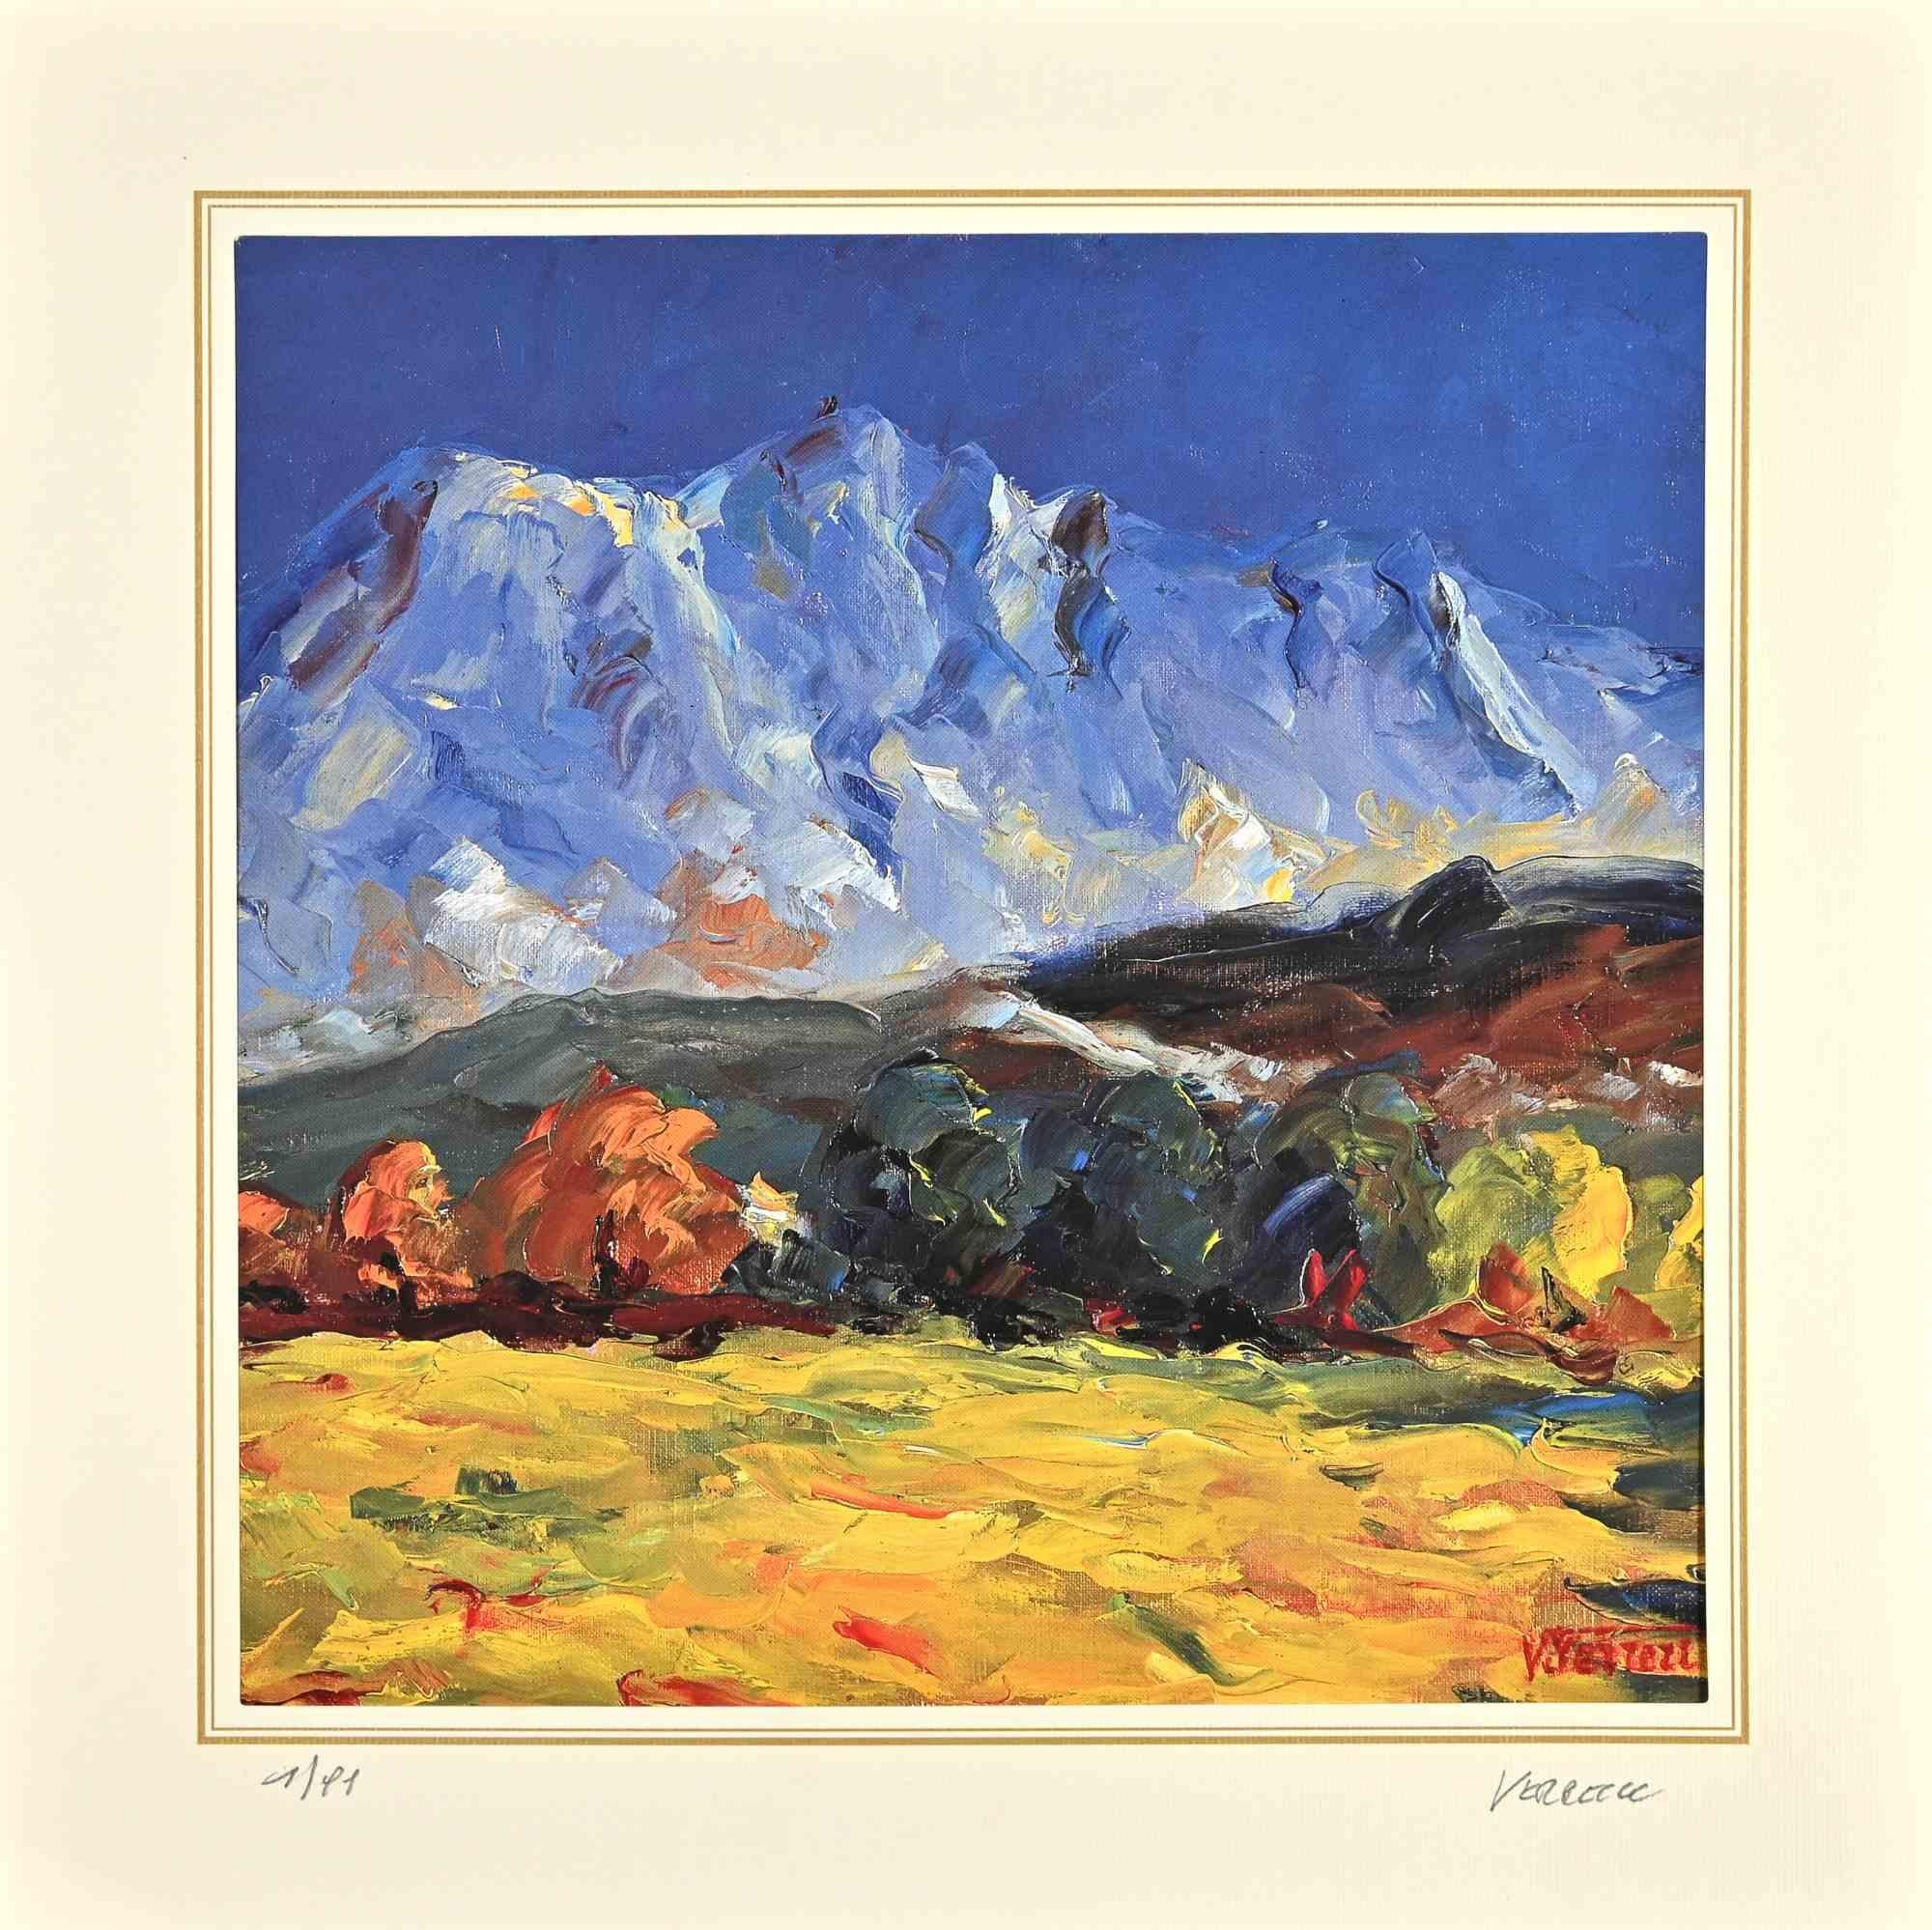 Landscape  with Mountains is a lithograph attributed to Nicholas Verrall (1945) in the Late 20th Century.

Hand-signed on the right corner. Numbered, Edition, 1/99, on the left margin. On the back is the label of the certificate of 